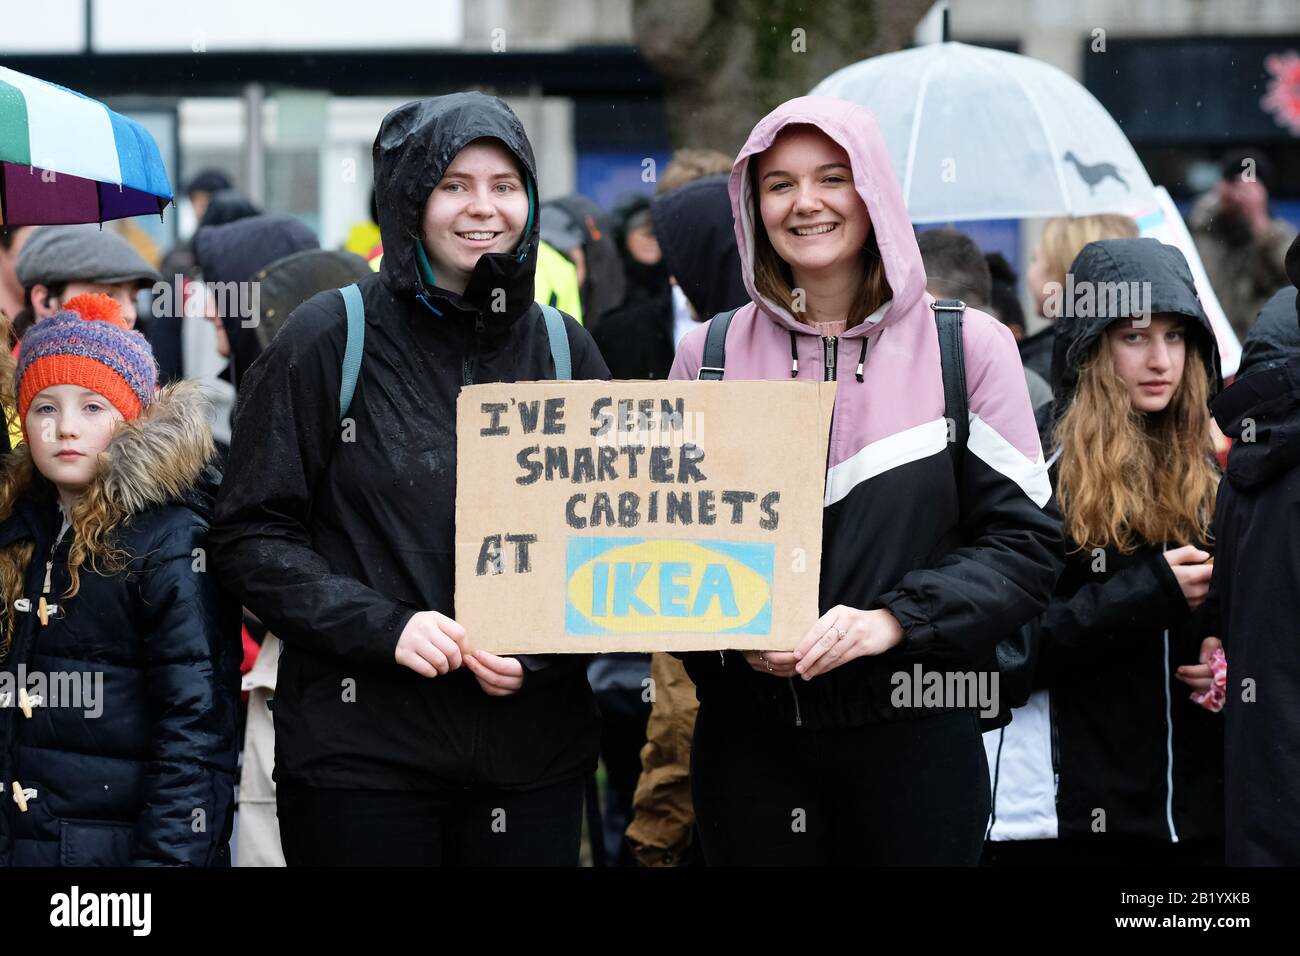 Bristol, UK - Friday 28th February 2020 - Young student protesters and families gather on College Green in the rain to support the Bristol Youth Strike 4 Climate. Credit: Steven May/Alamy Live News Stock Photo